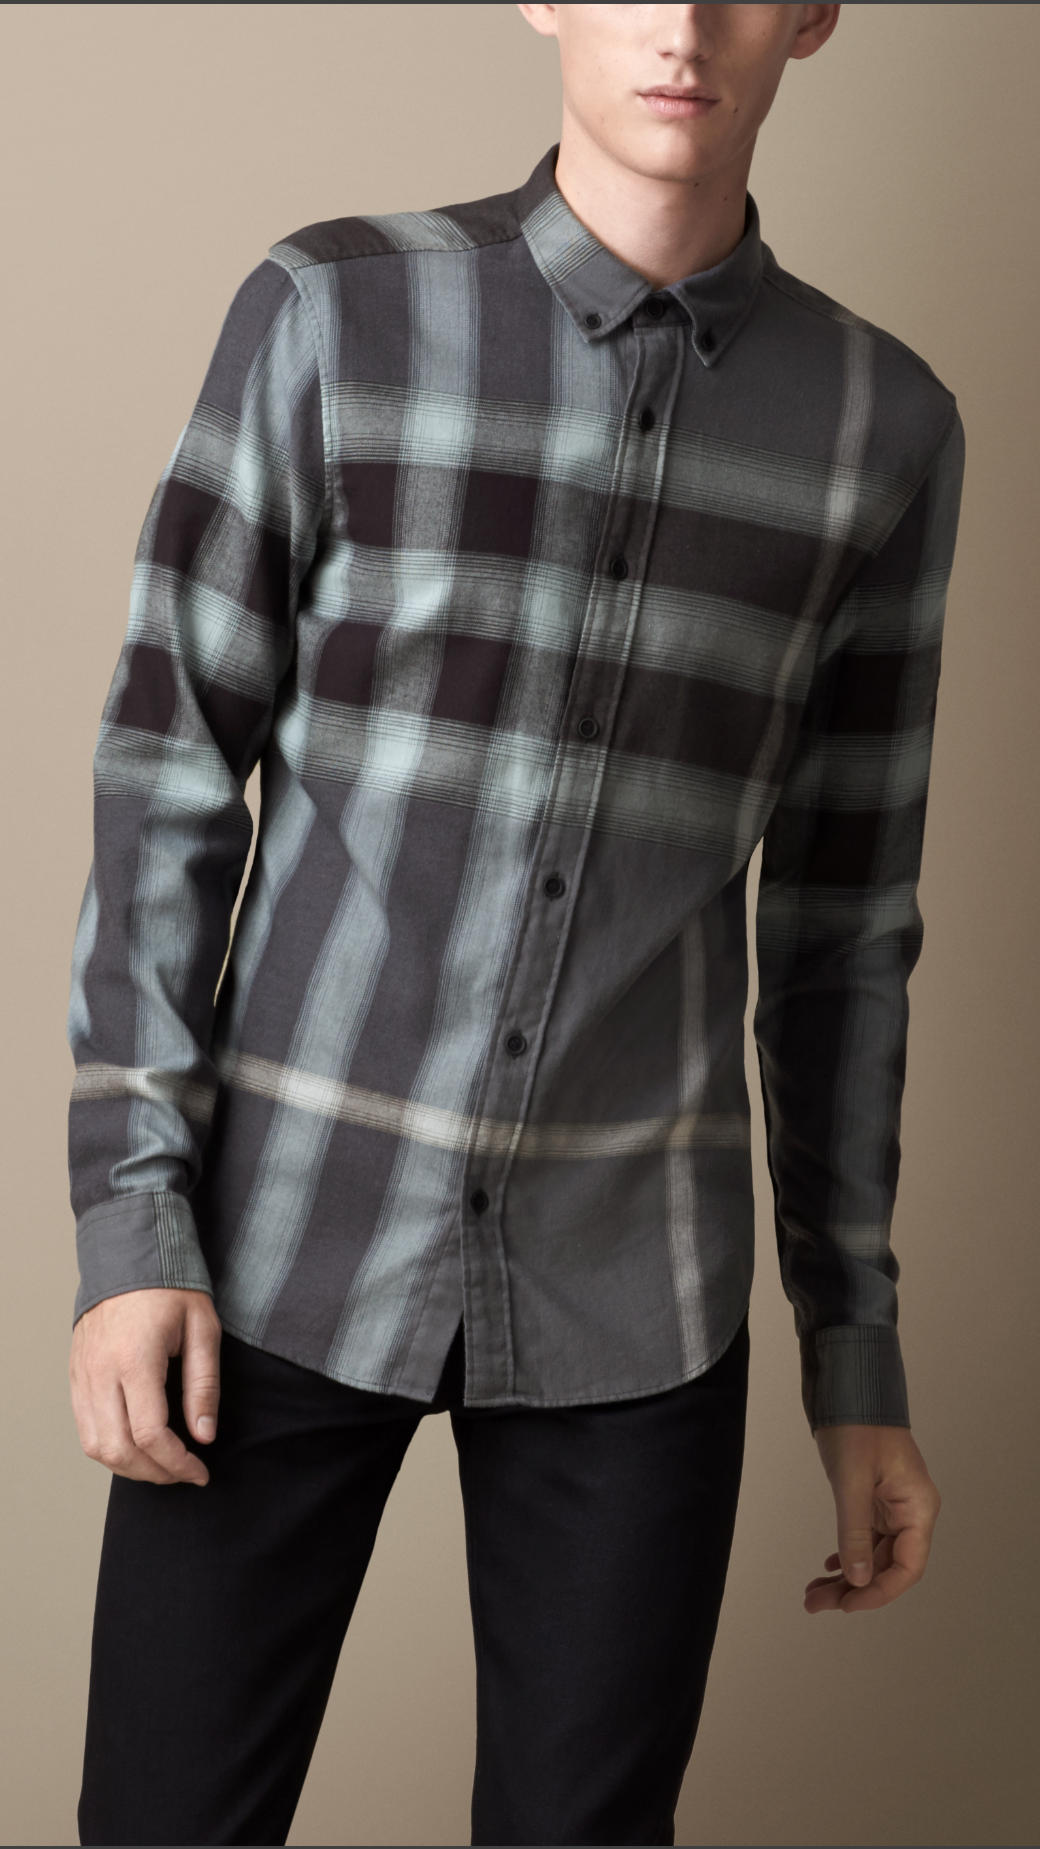 burberry flannel blue